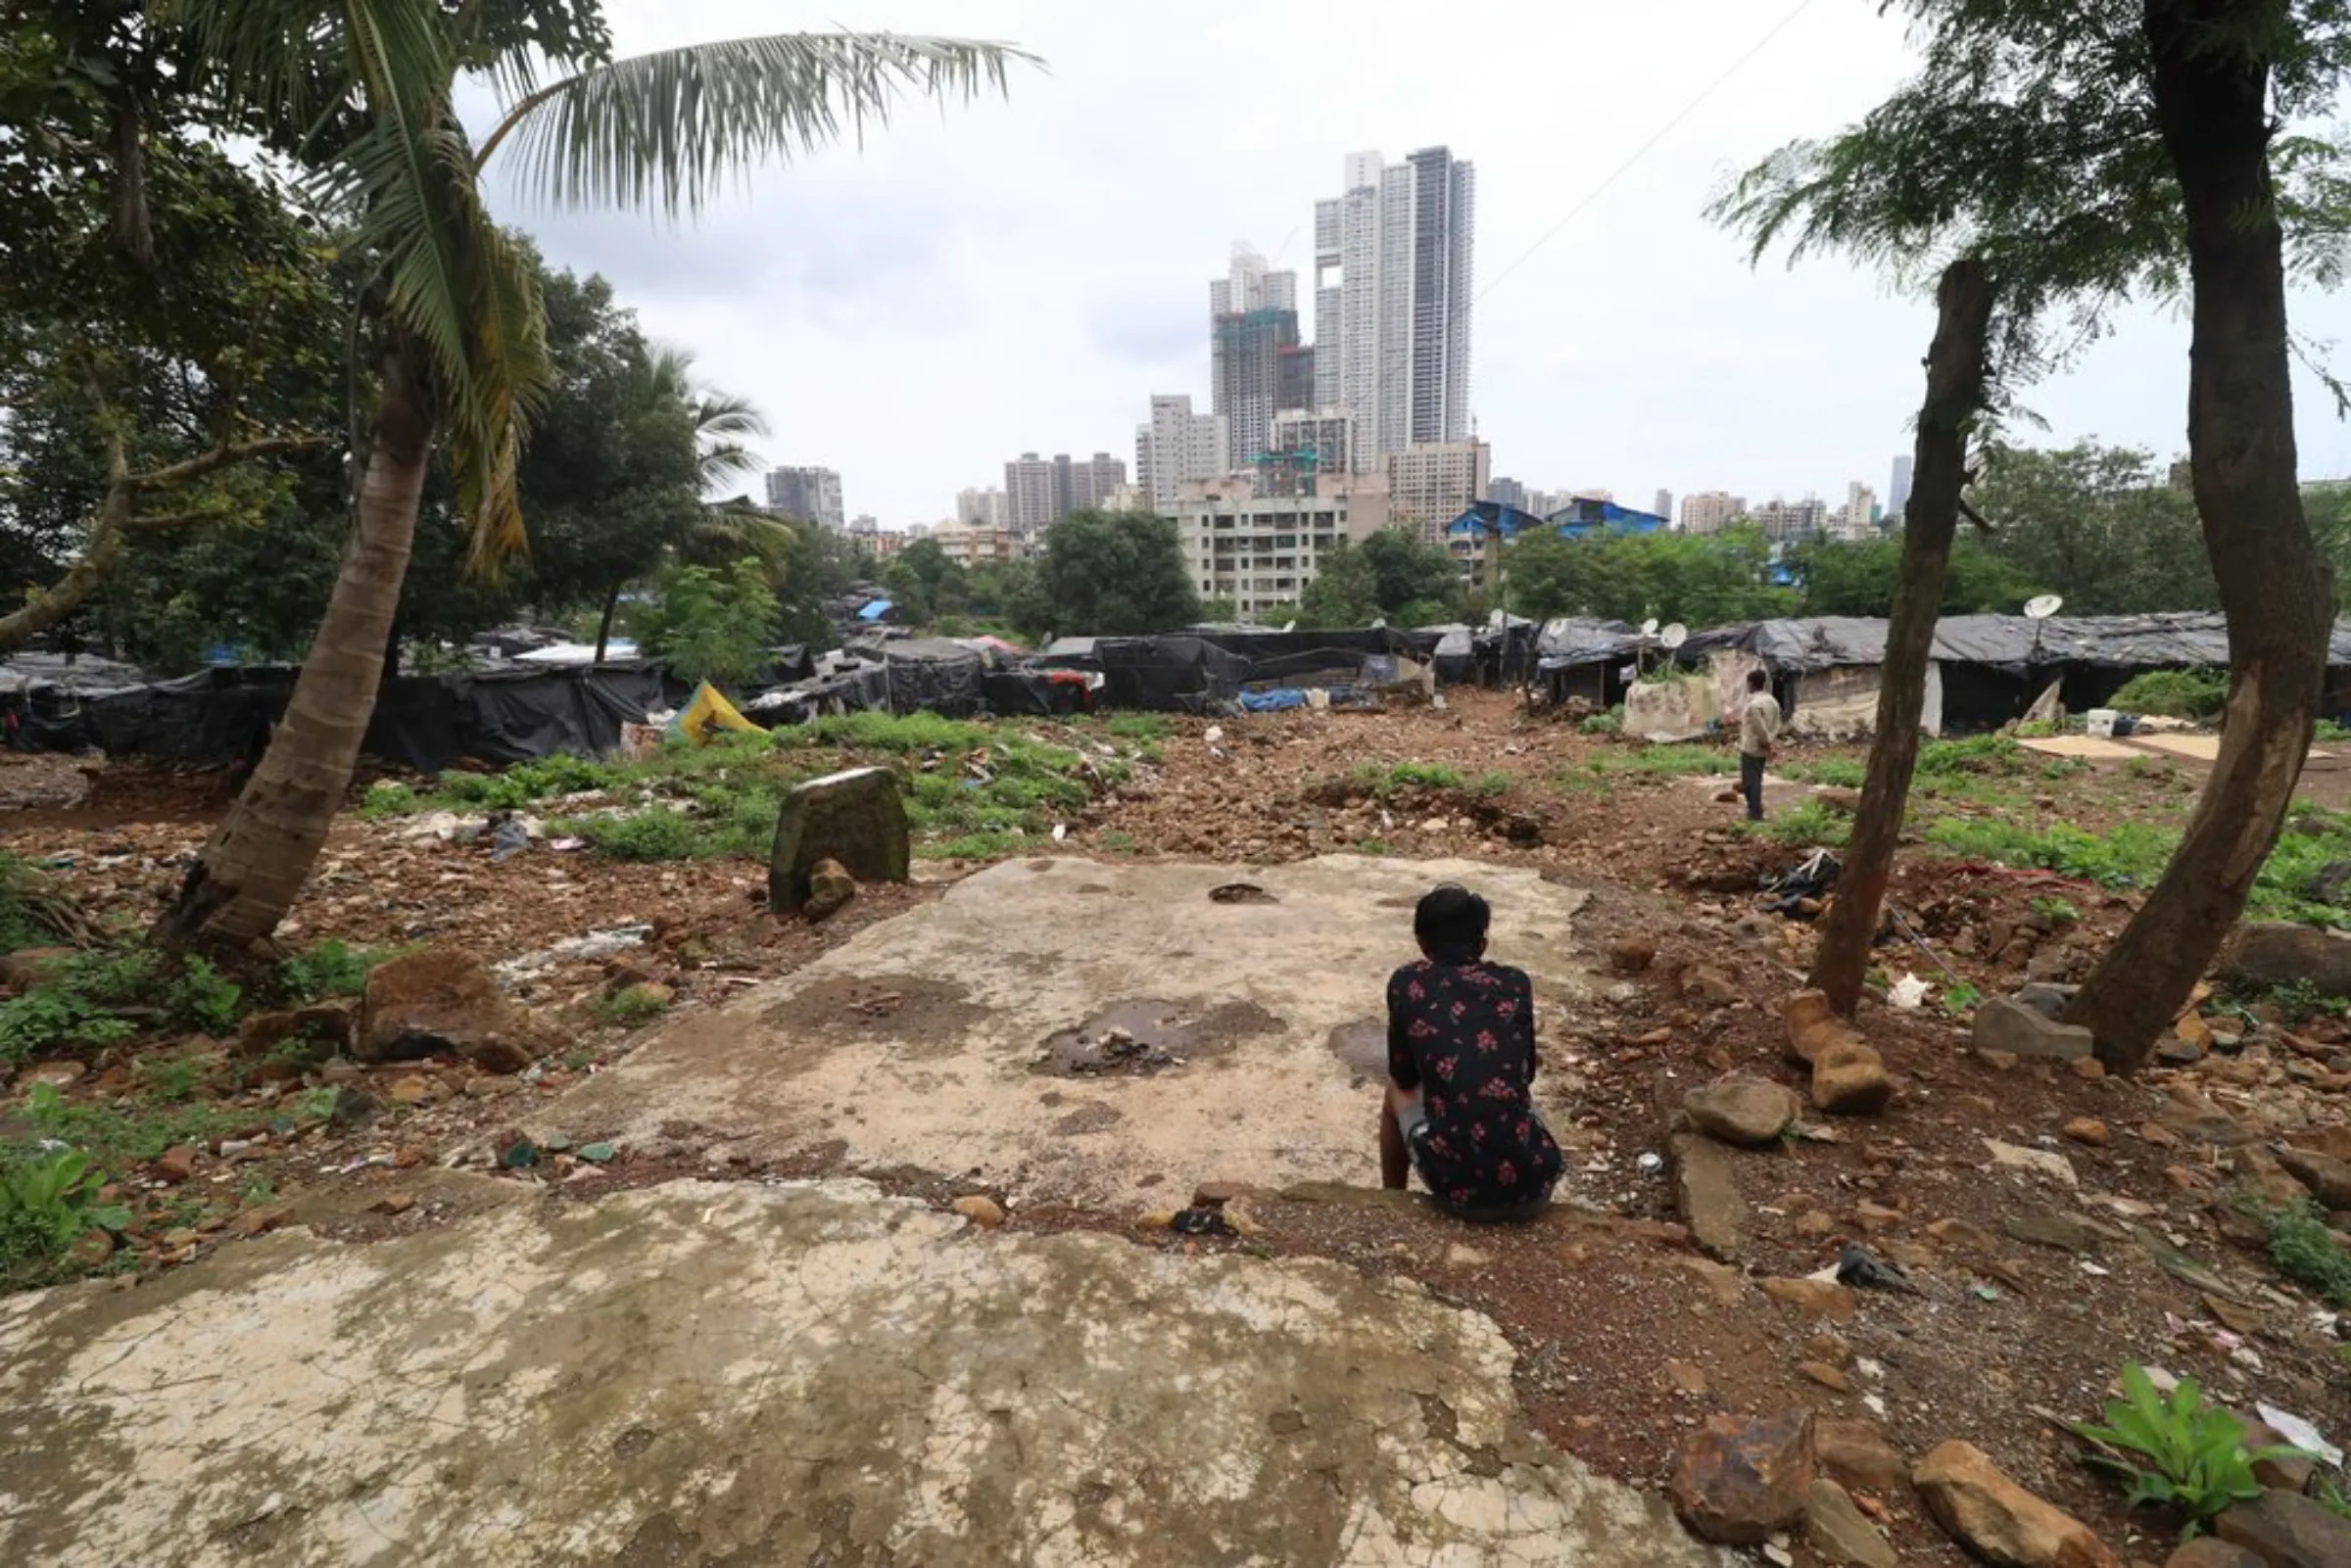 A man sits at the site of a house destroyed in Ambedkar Nagar slum after a retaining wall of a water reservoir collapsed in 2019 during heavy rains in Mumbai, India, September 6, 2021